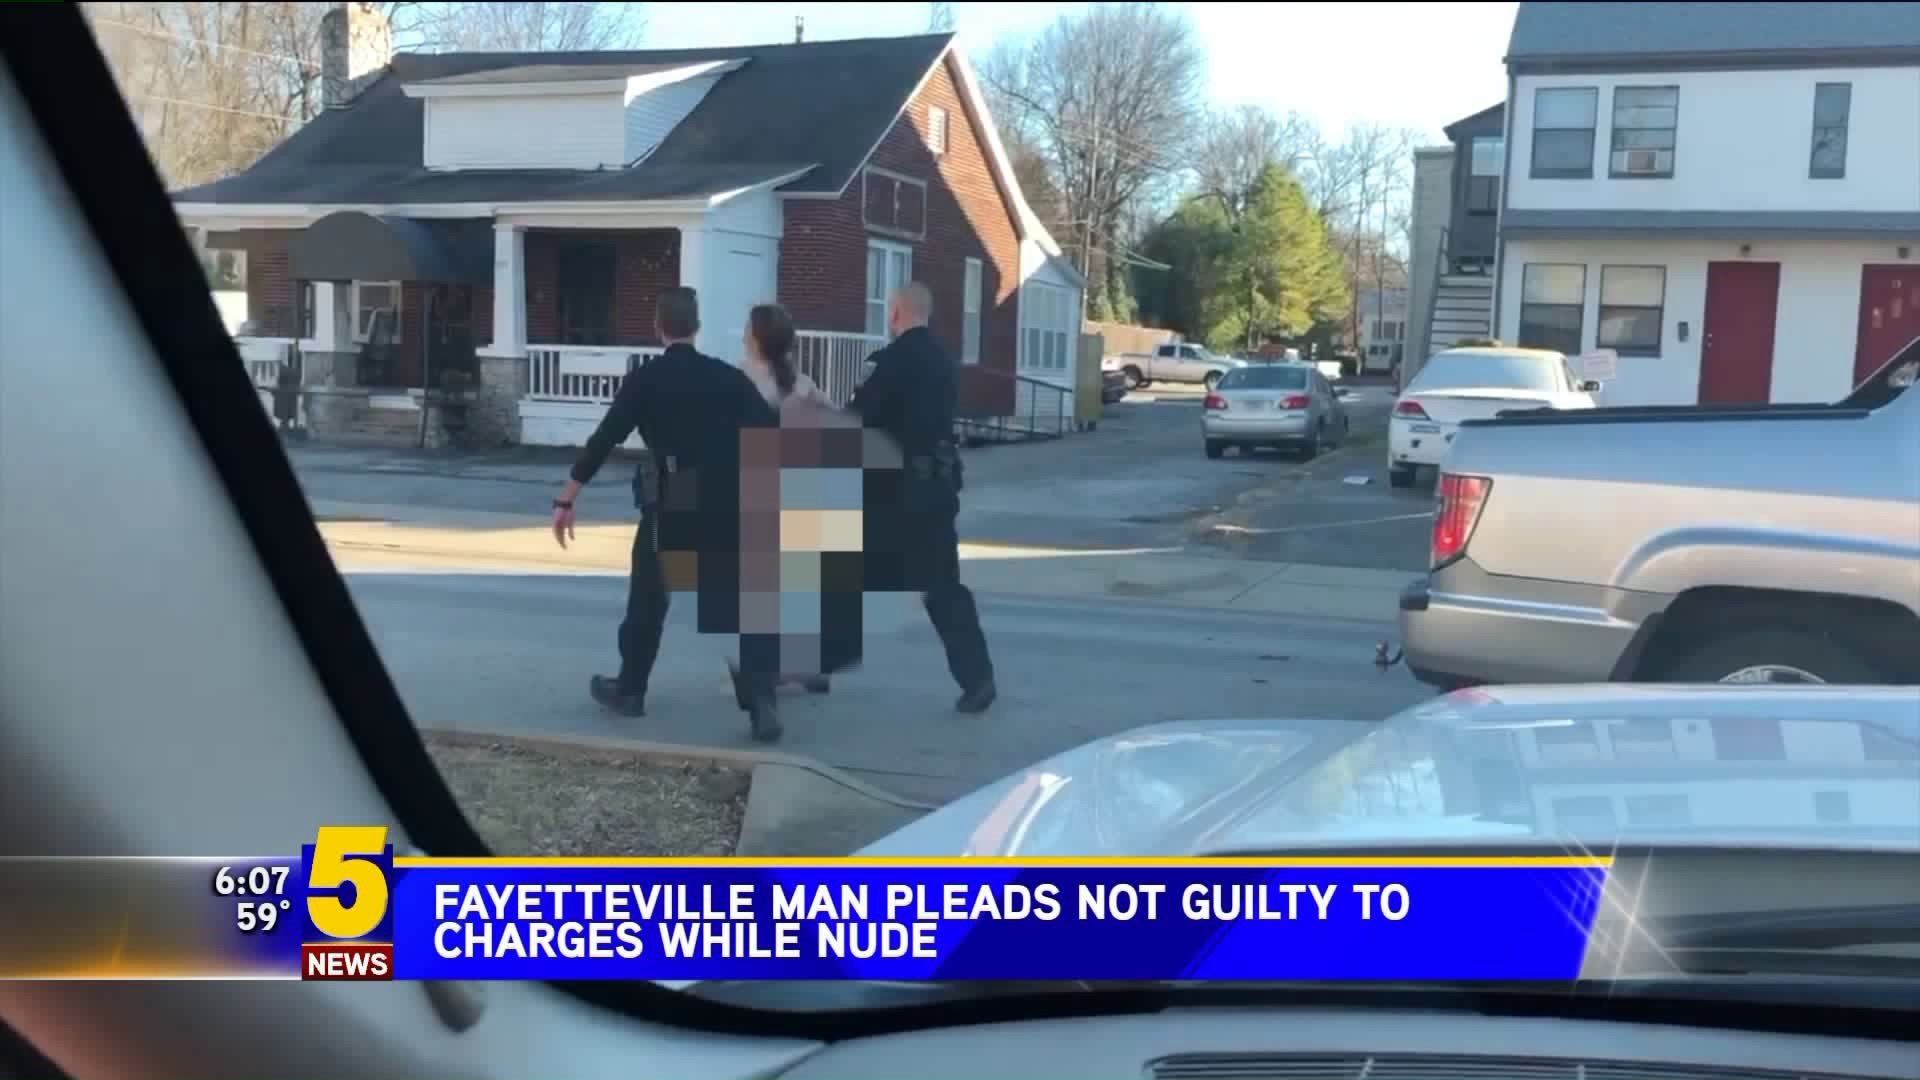 Fayetteville Man Pleads Not Guilty To Charges While Nude